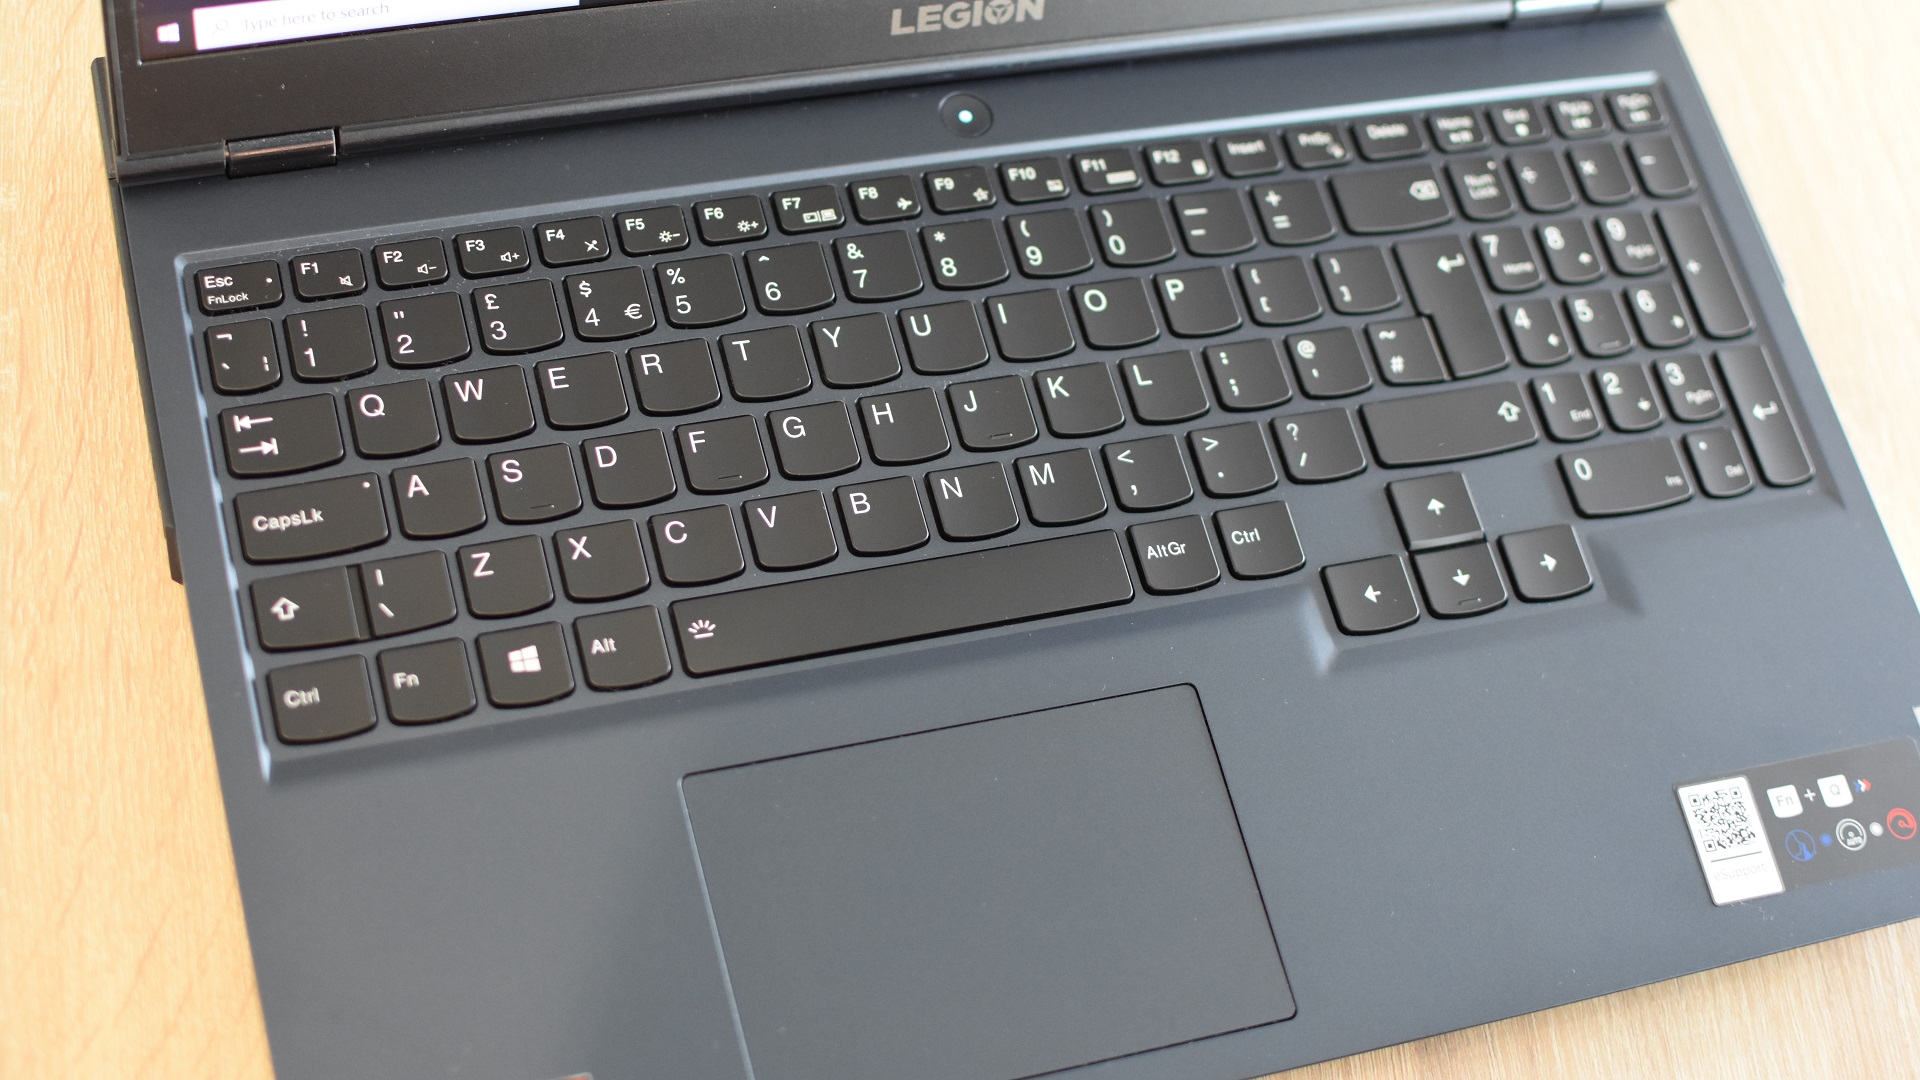 The keyboard and trackpad on the Lenovo Legion 5 gaming laptop.